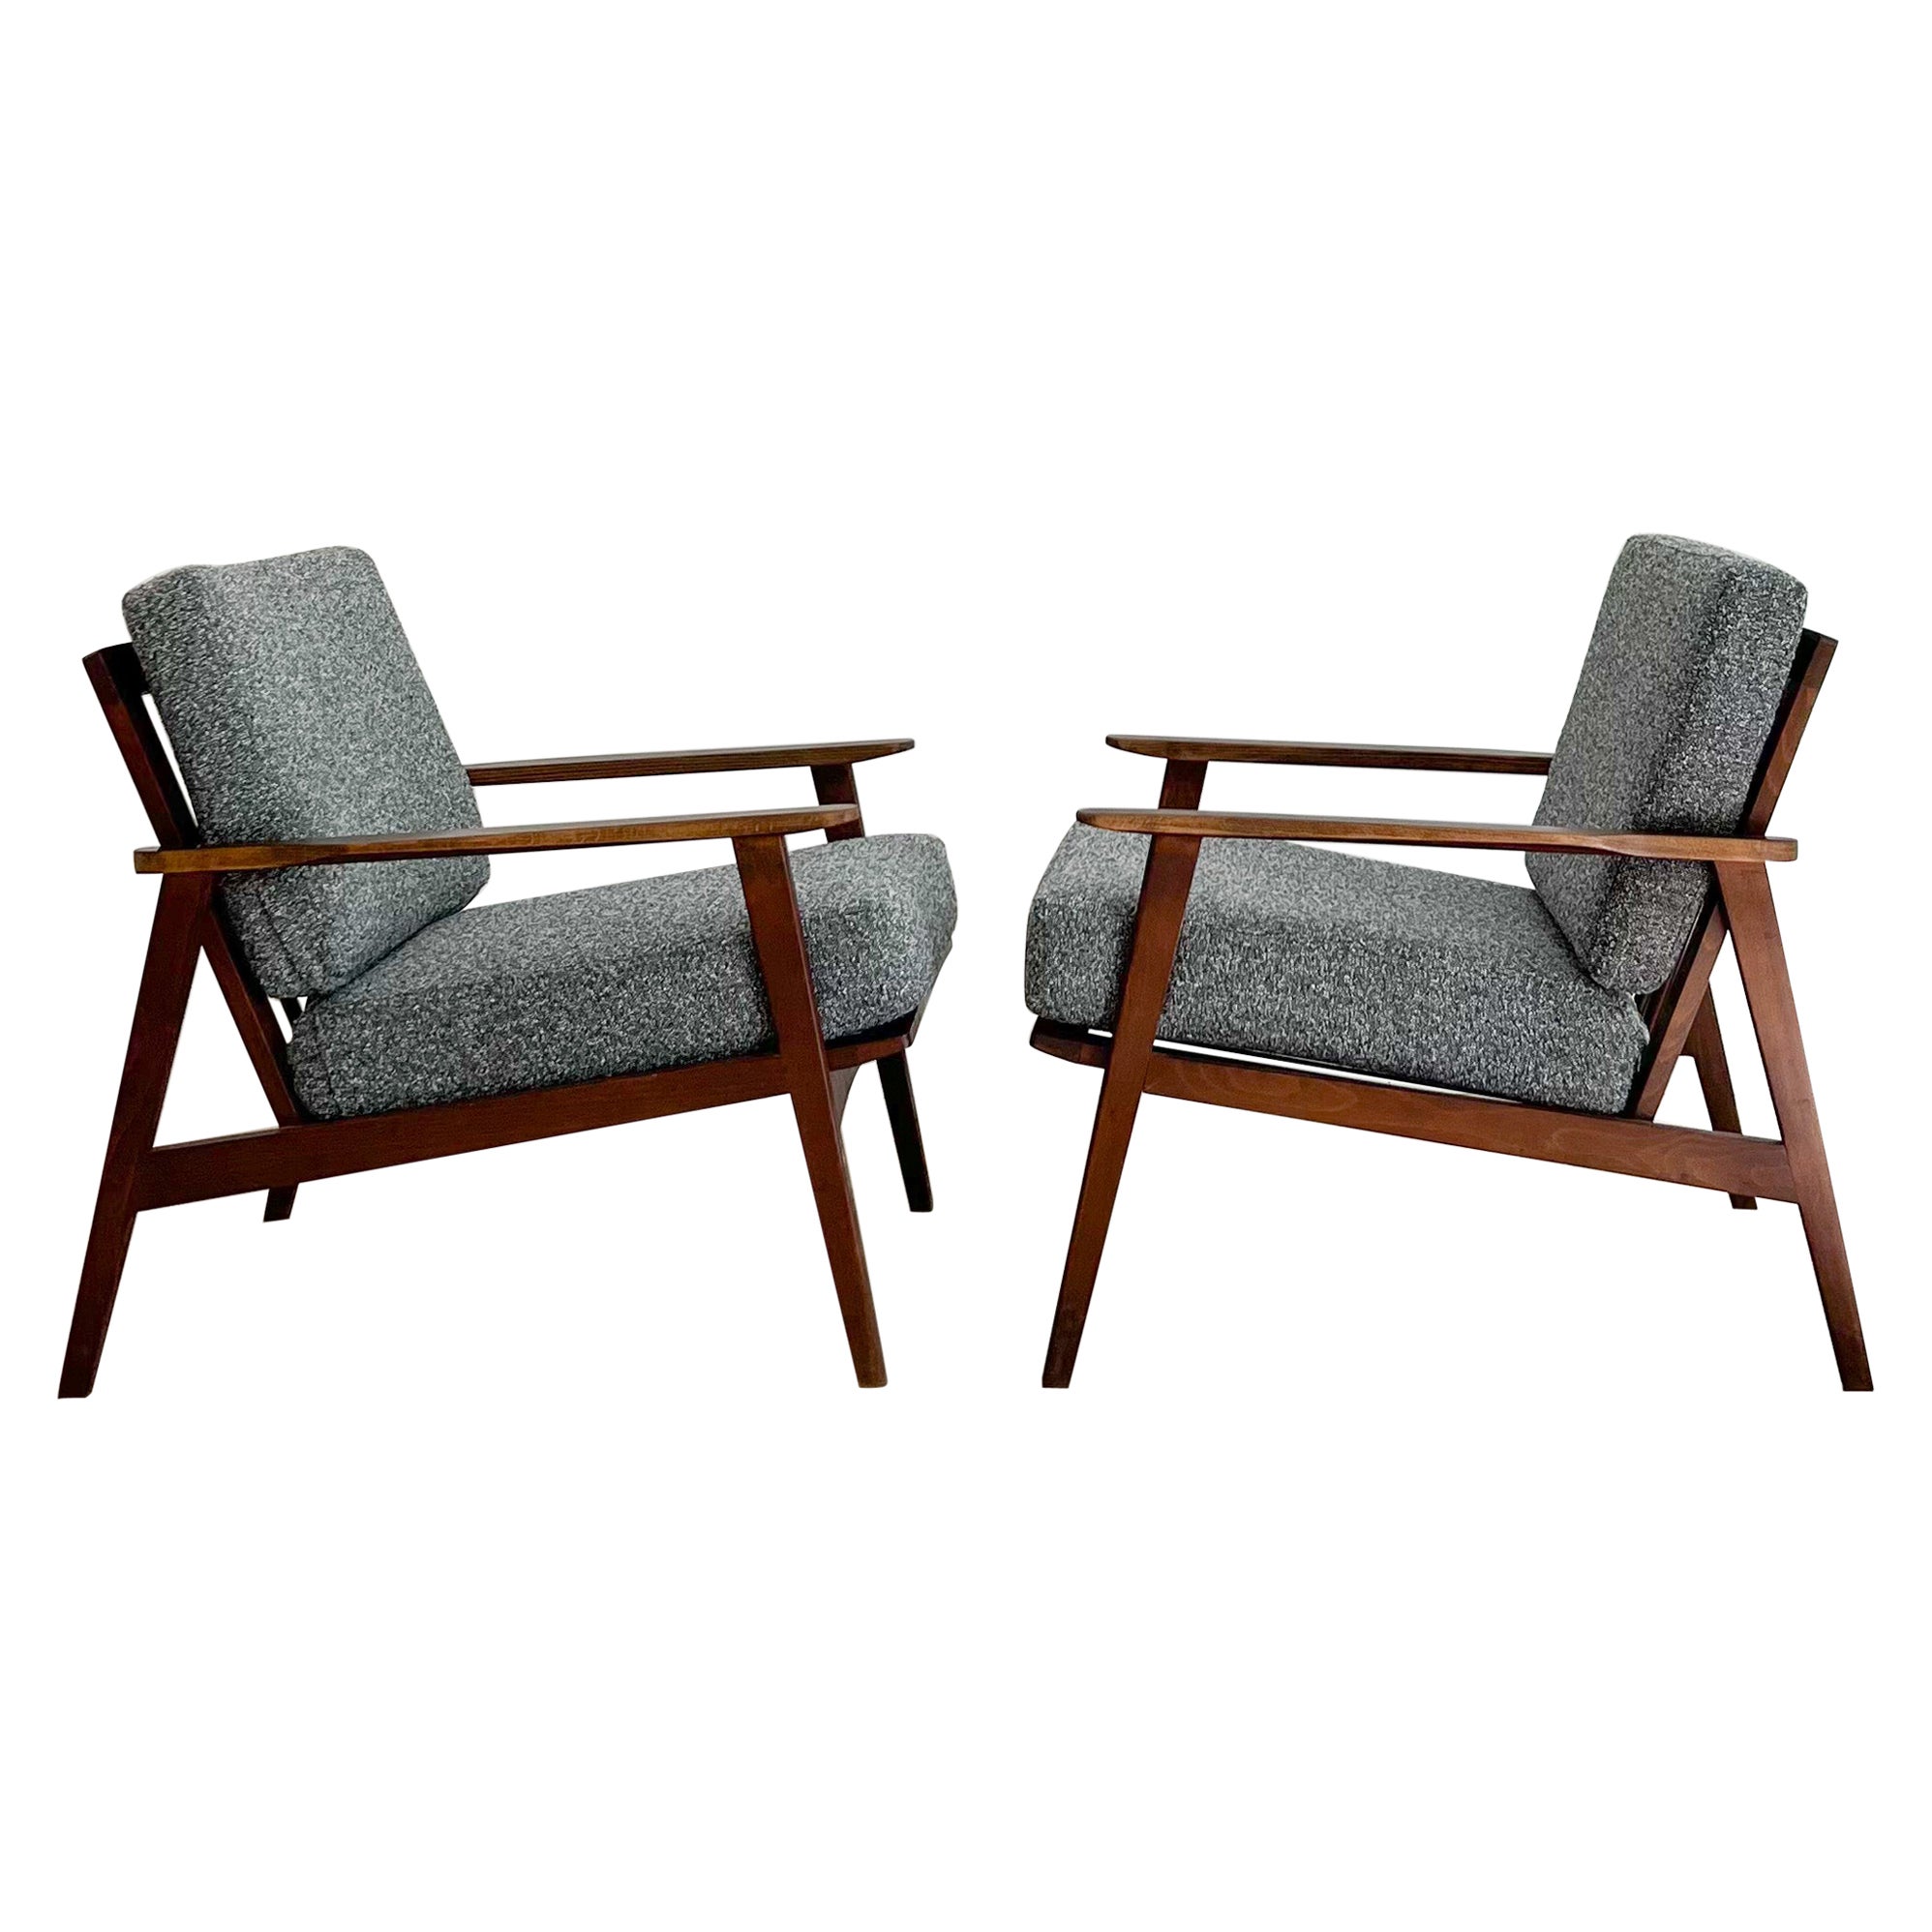 Pair of Mid-Century Lounge Chairs w/ New Grey Tweed Upholstery